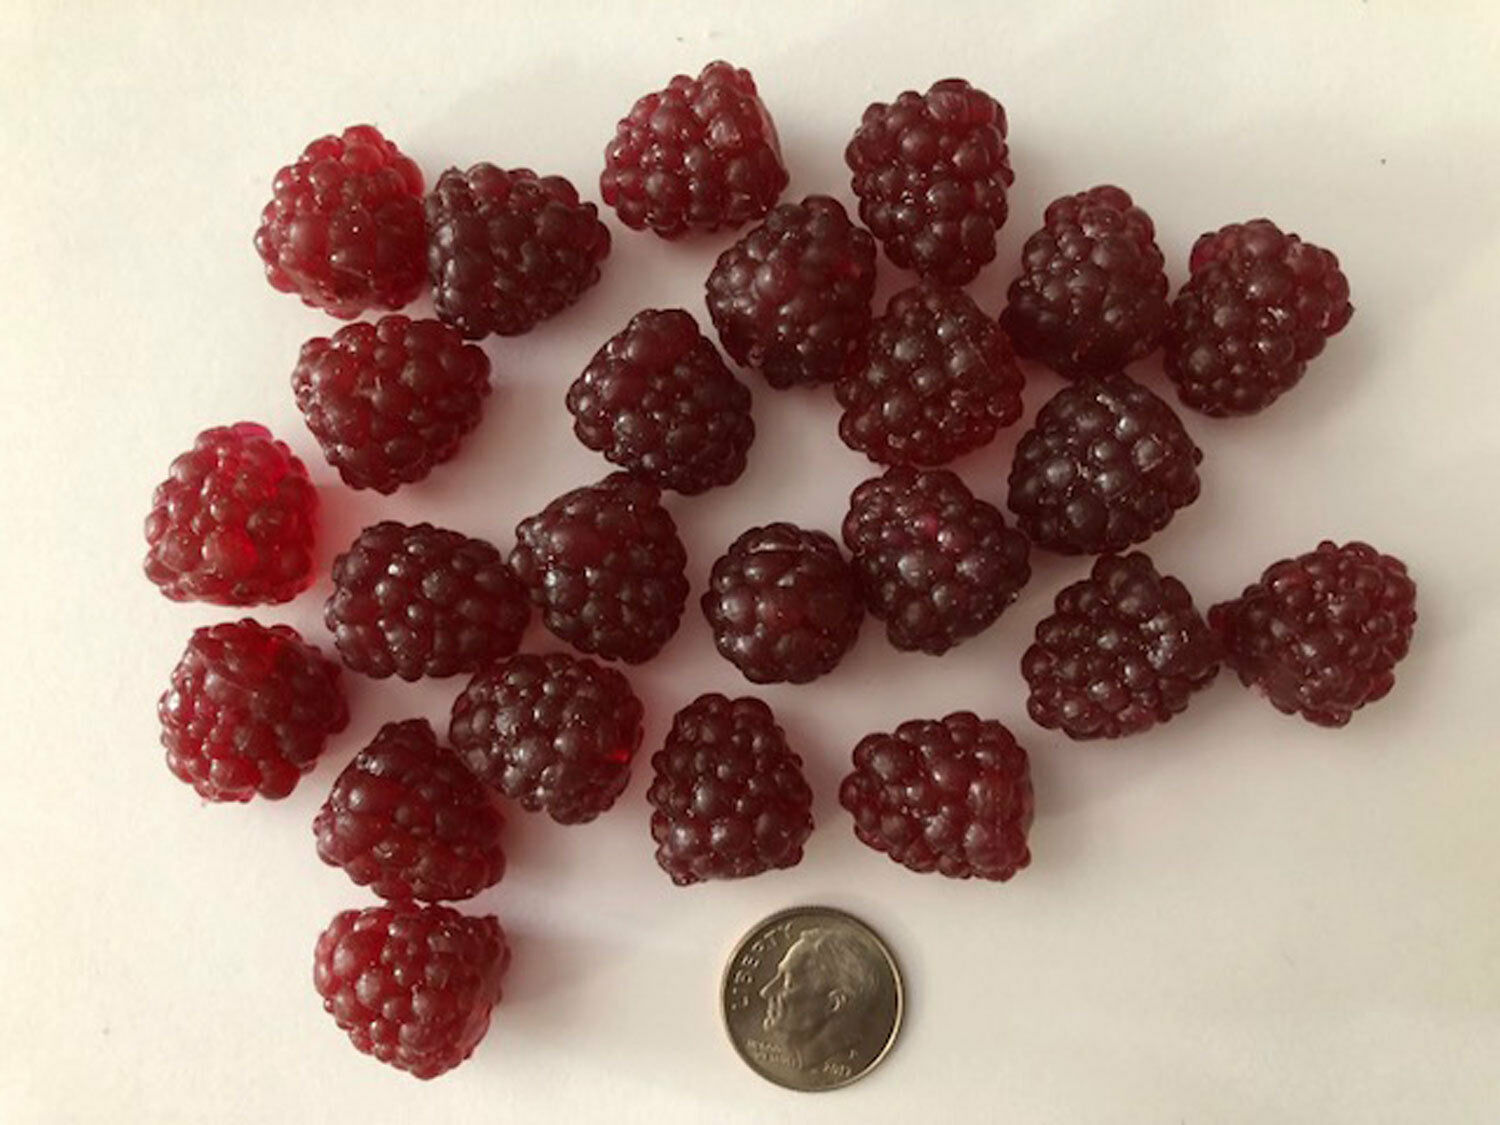 Artificial Small Raspberry, Bag Of 24 Decorative Fake Fruit Berries